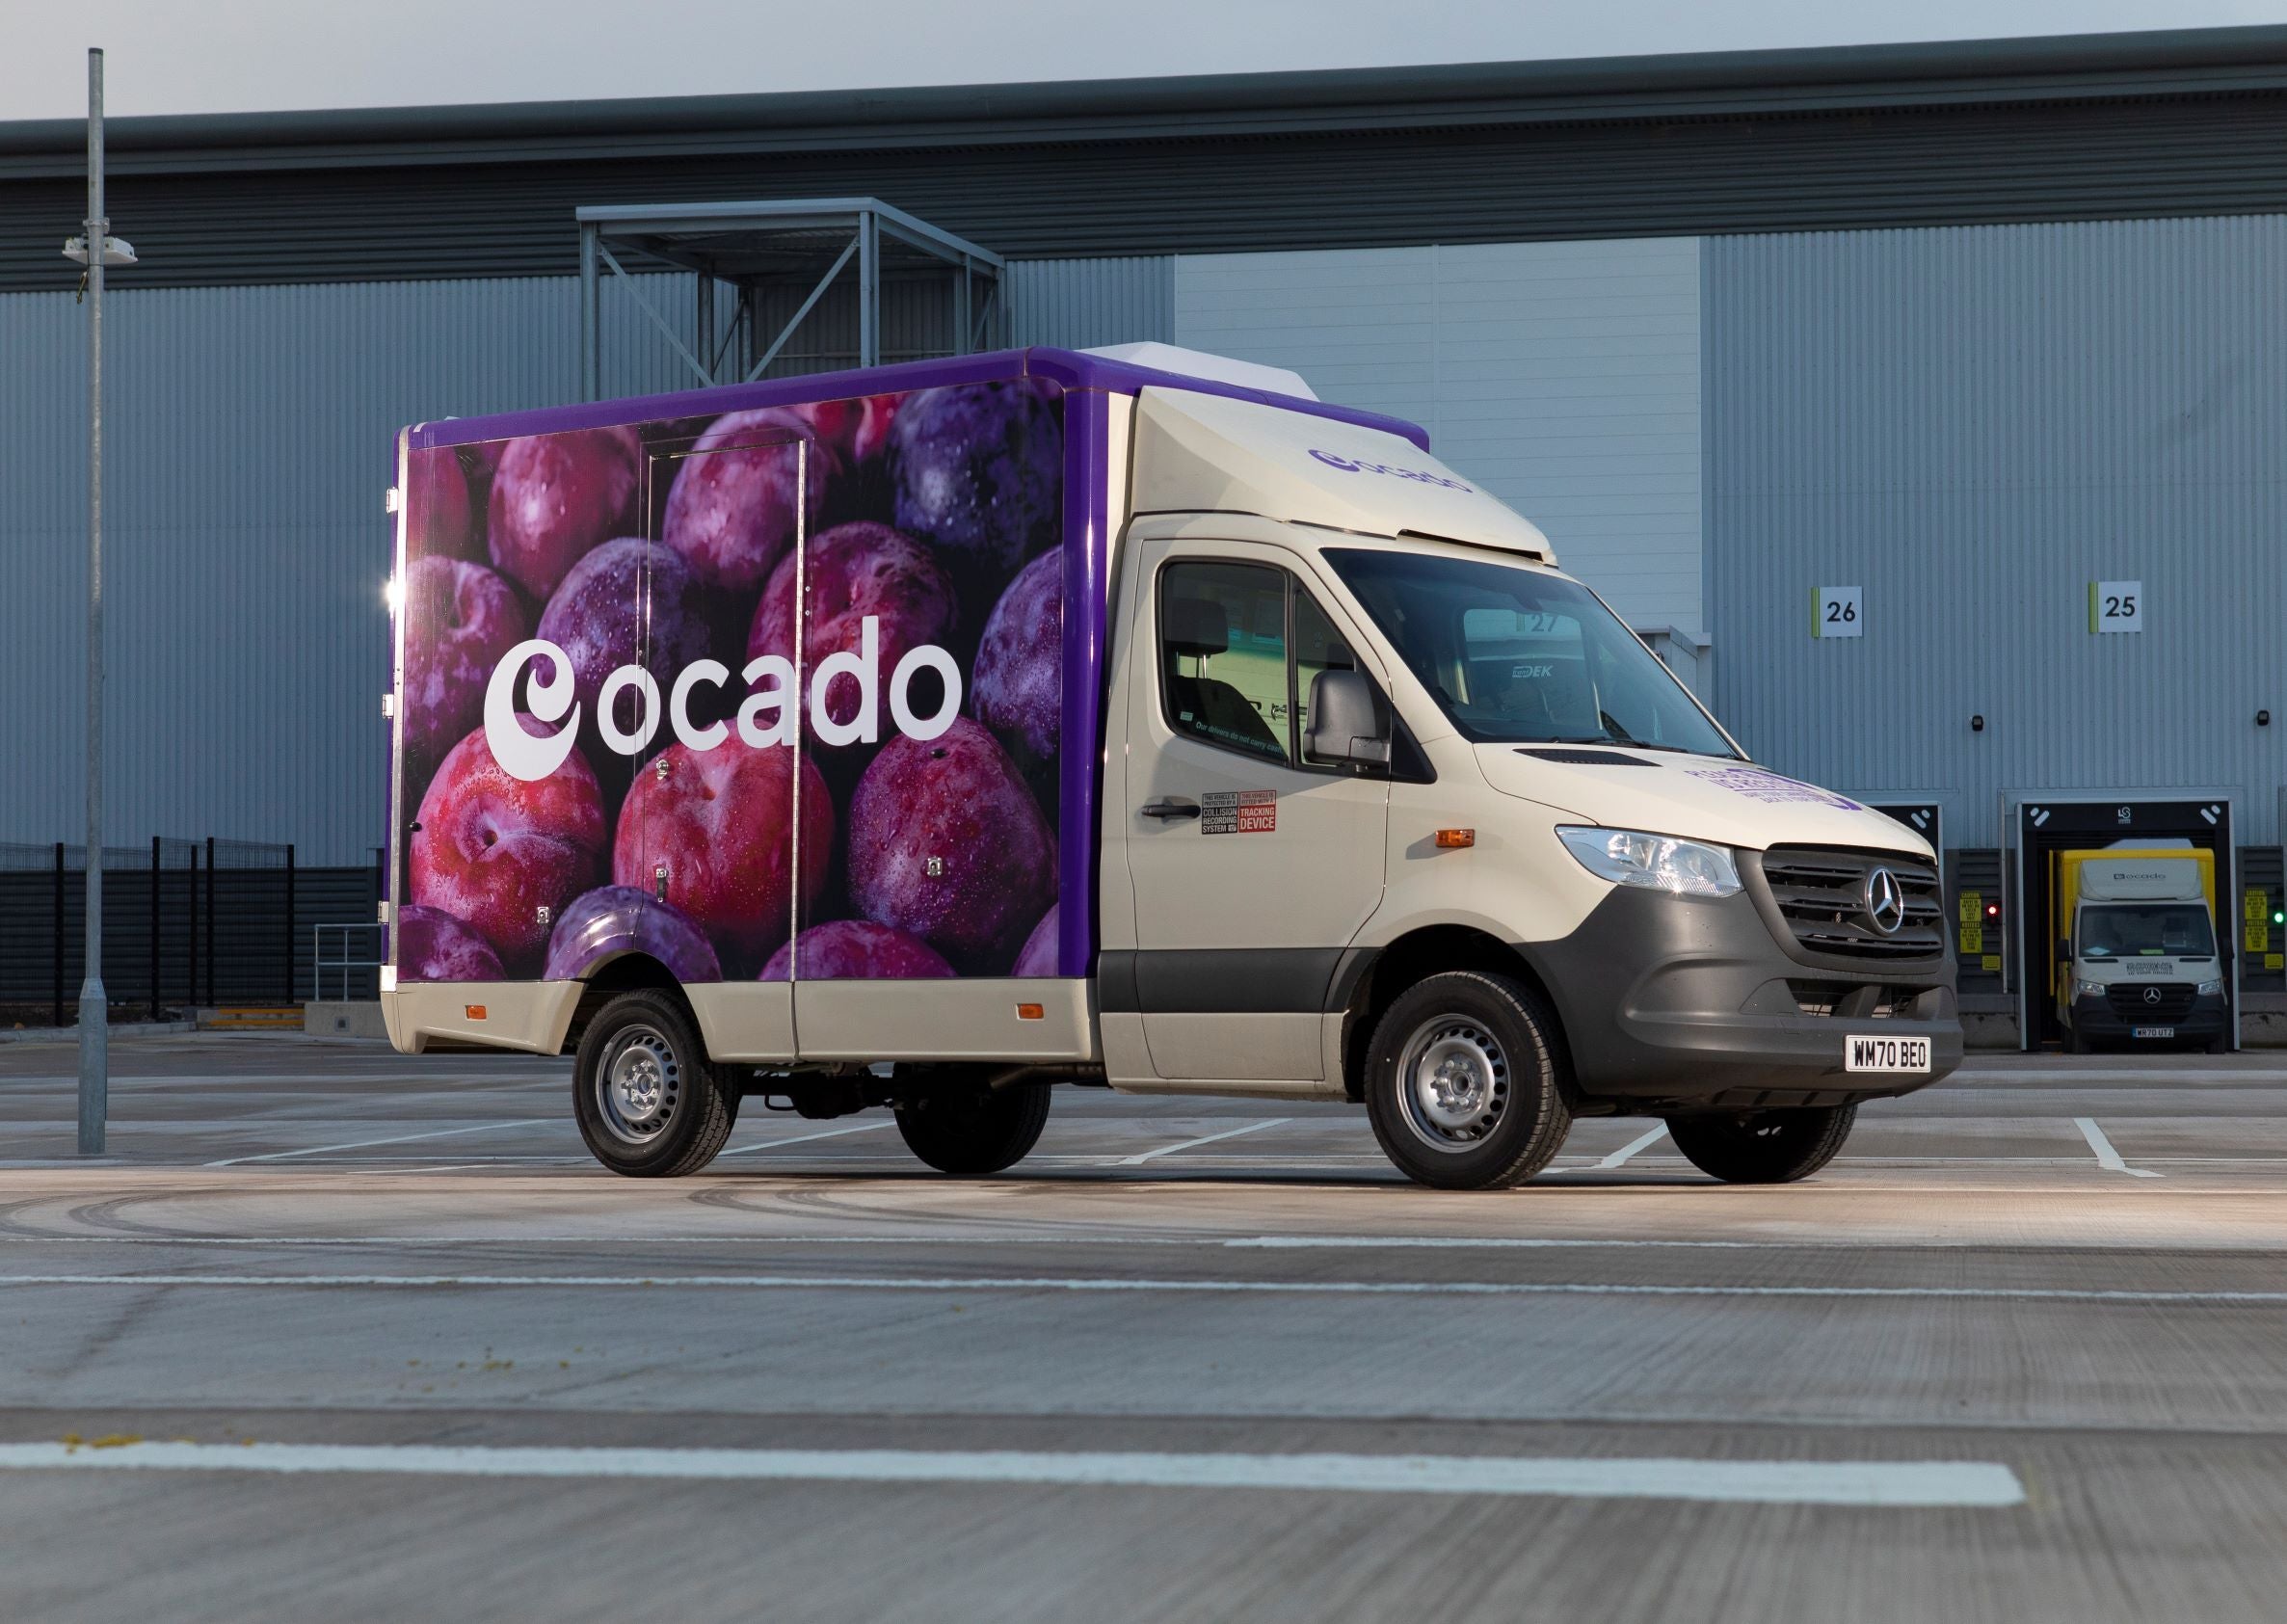 Online retailer Ocado has revealed plans to raise £575 million to help fund its growth plans (PA)